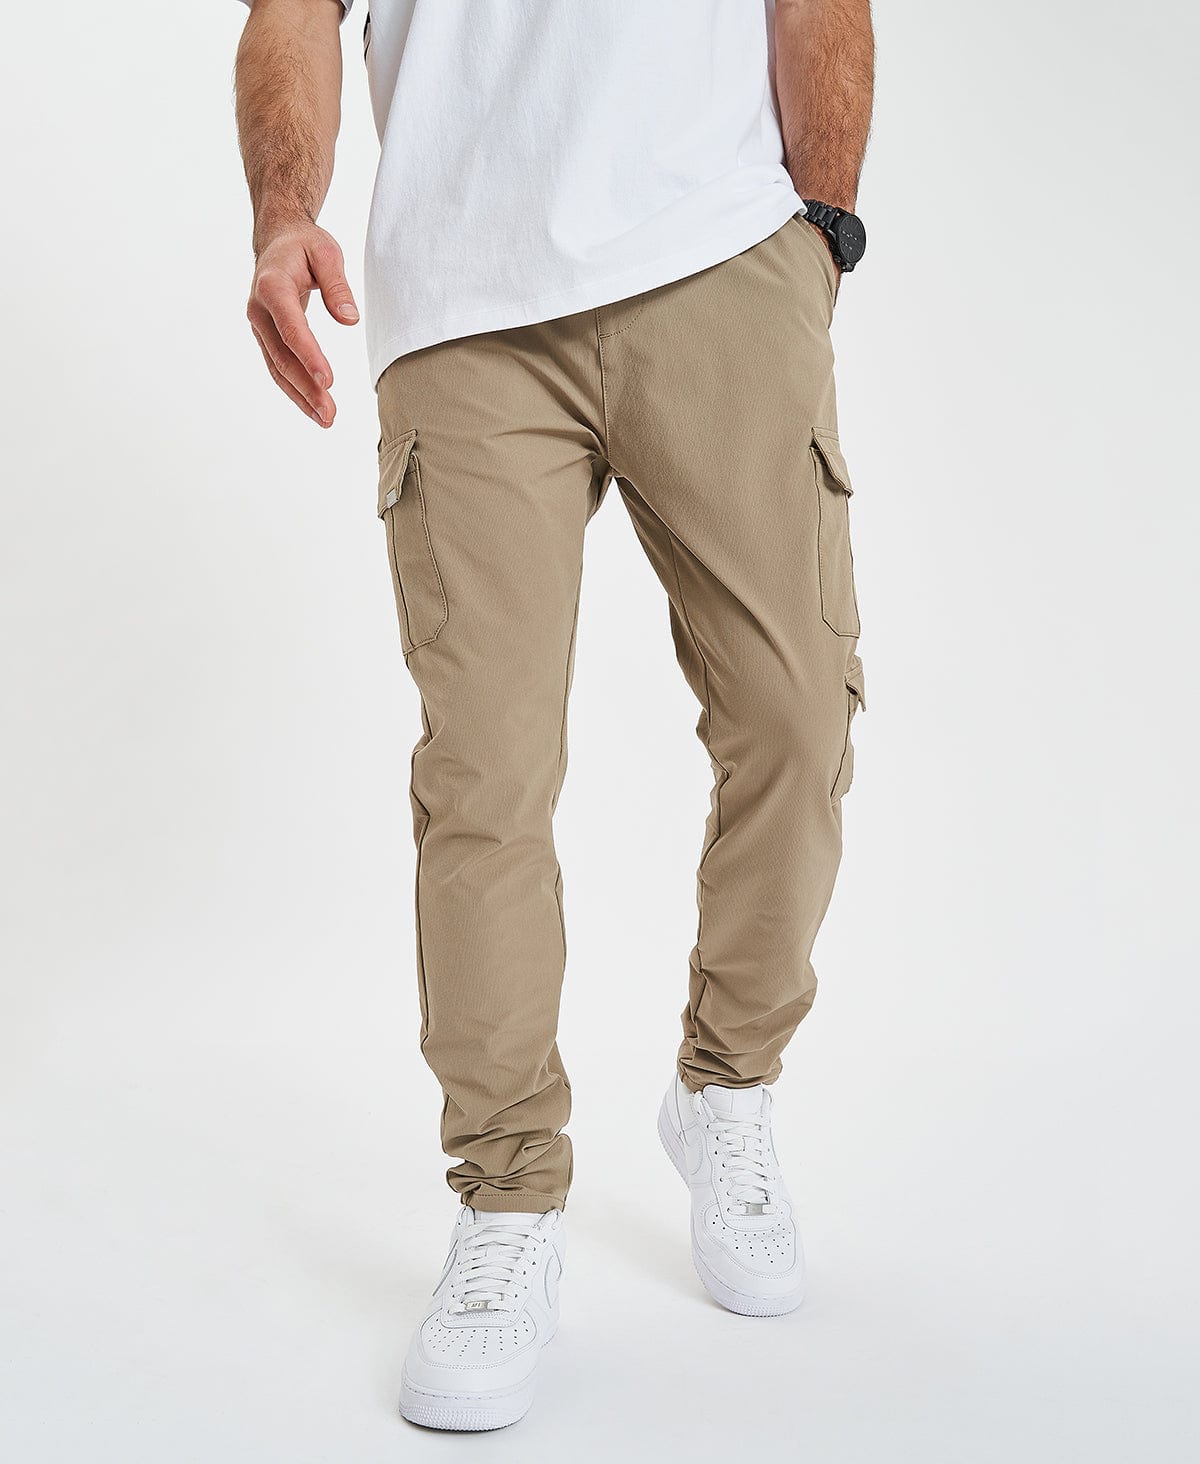 Super Skinny Cargo Jeans With Knee Rips  boohooMAN USA